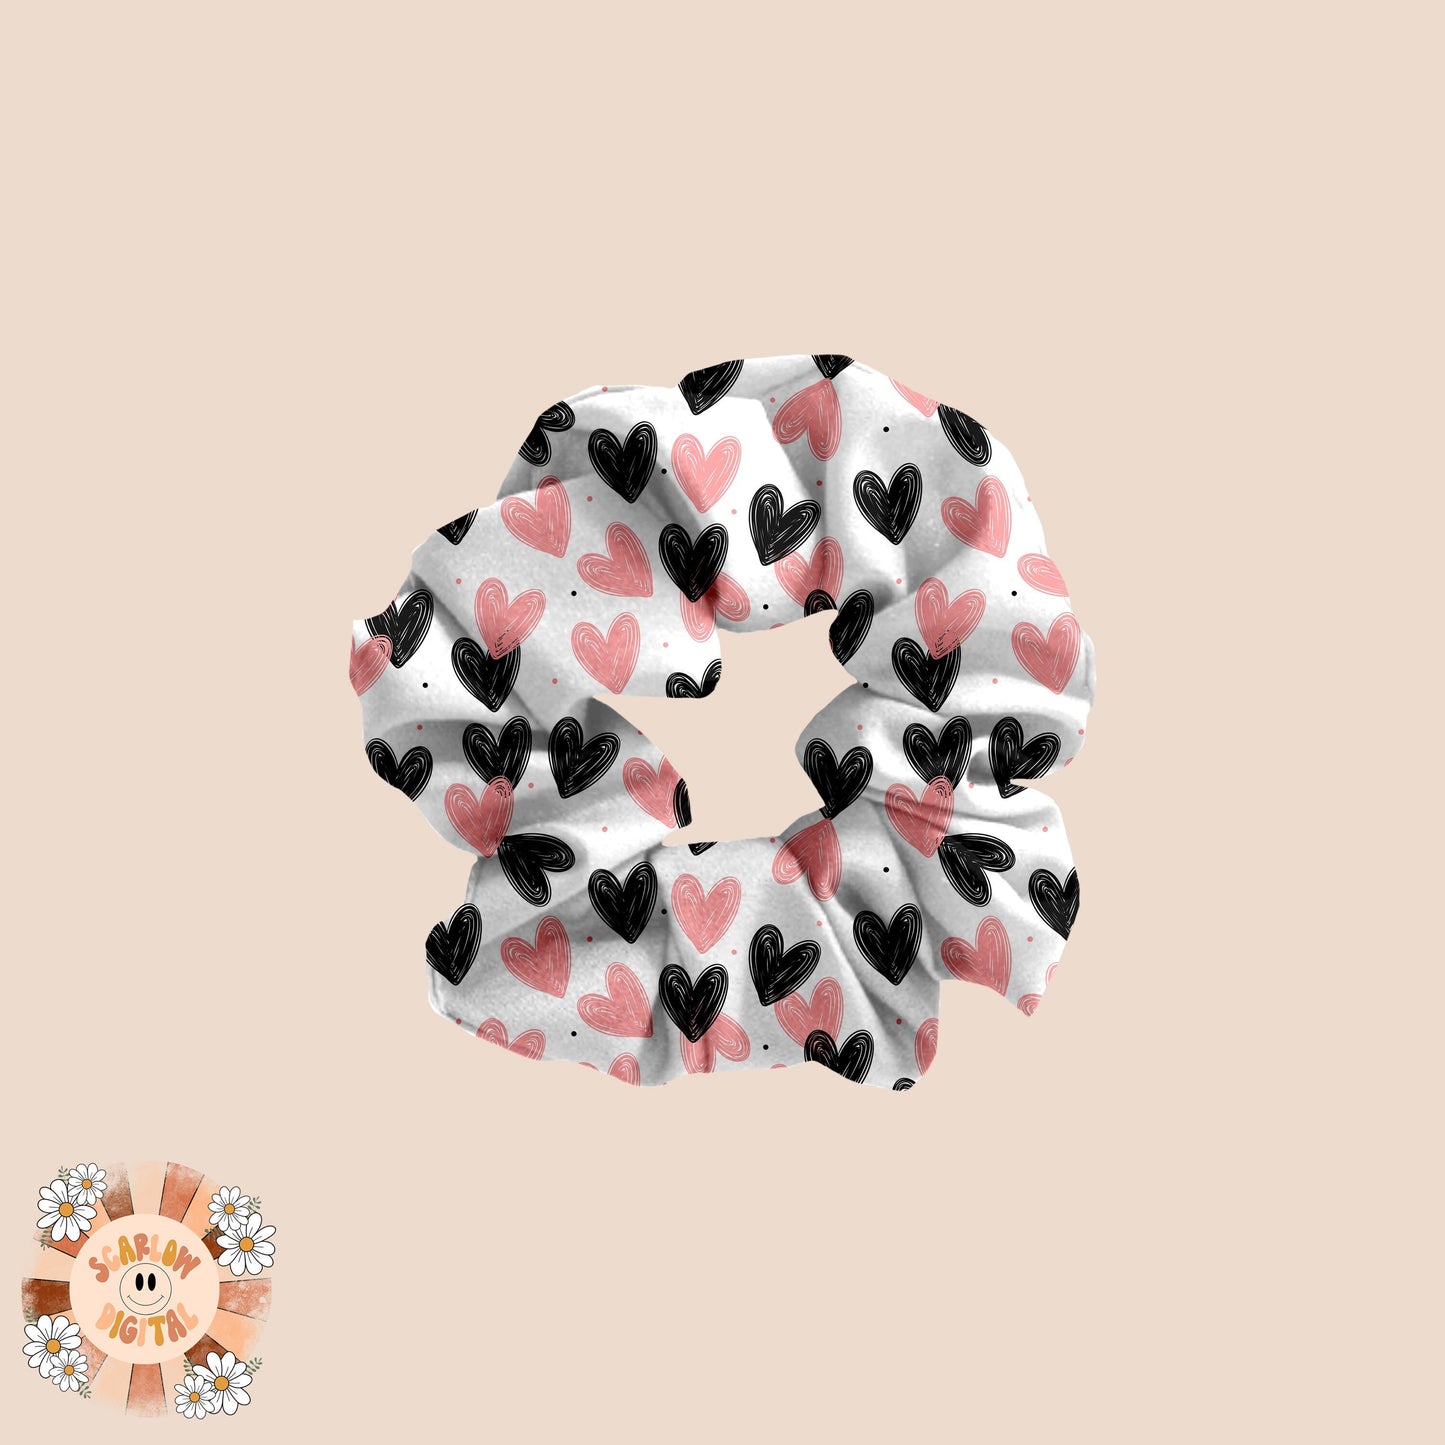 Doodle Hearts Seamless Pattern-Valentine's Day Sublimation Digital Design Download-xoxo seamless pattern, vday sublimation, hearts seamless